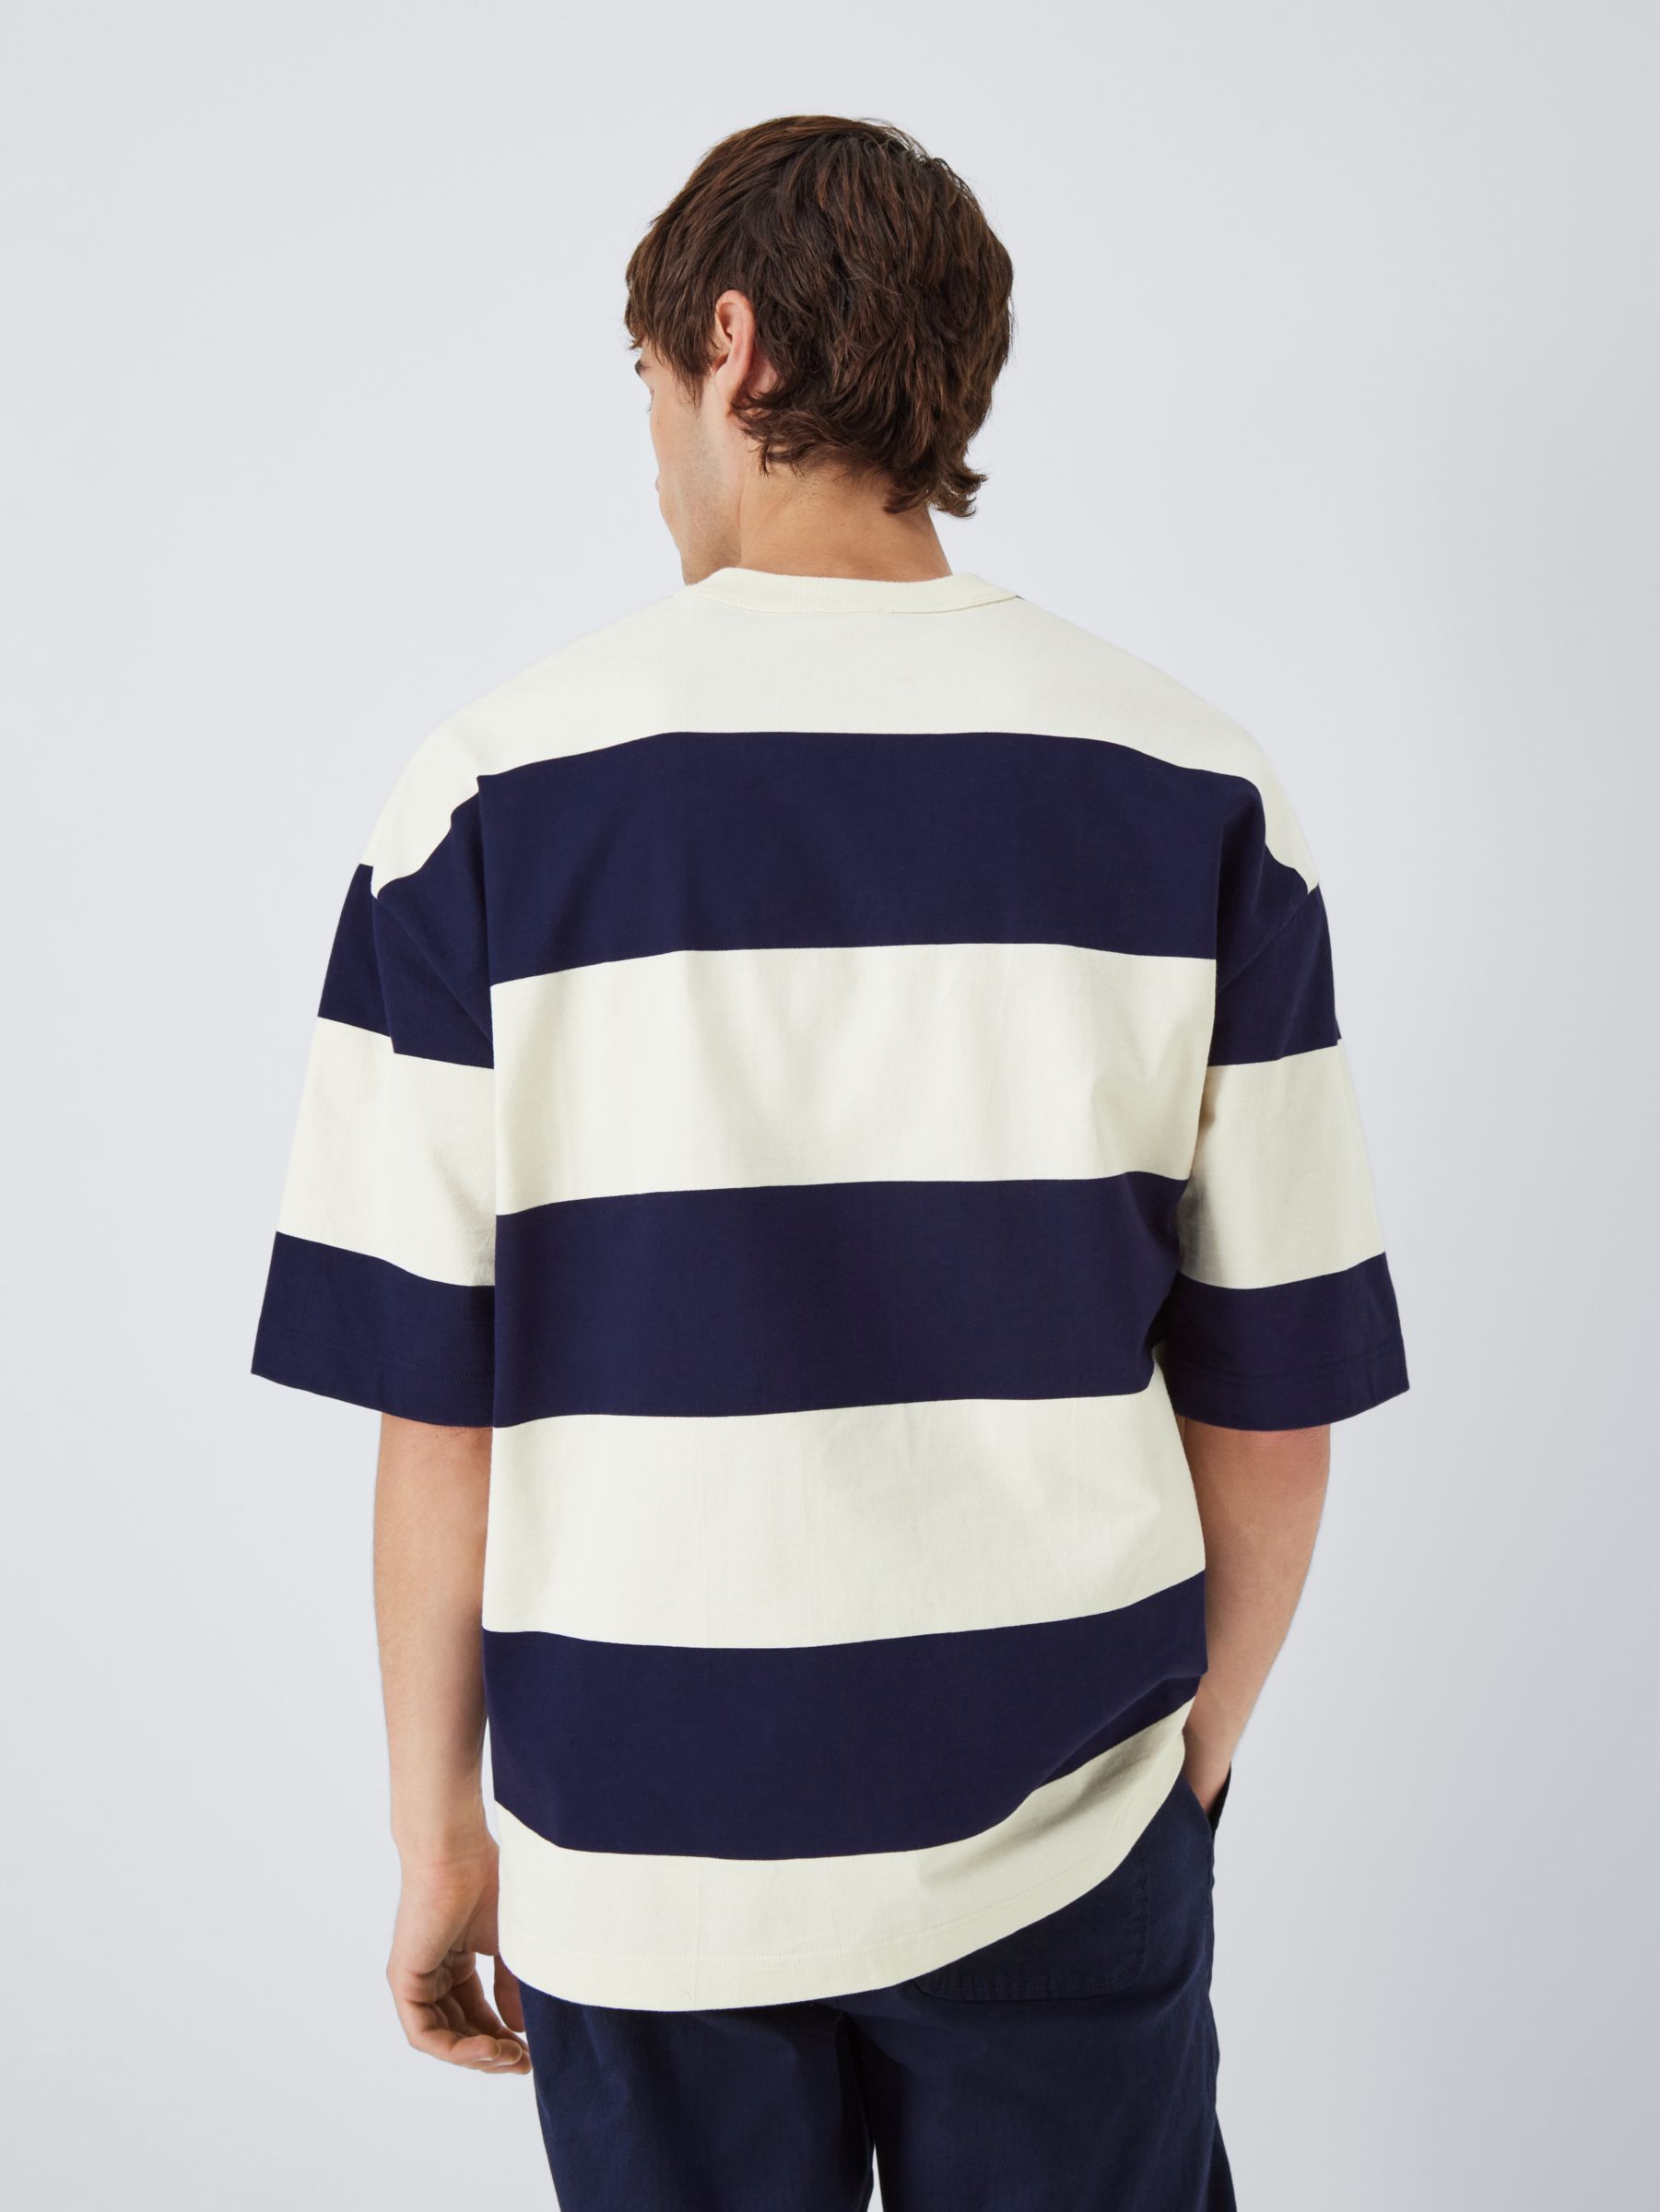 Armor Lux Striped Short Sleeve T-Shirt, White/Navy at John Lewis & Partners